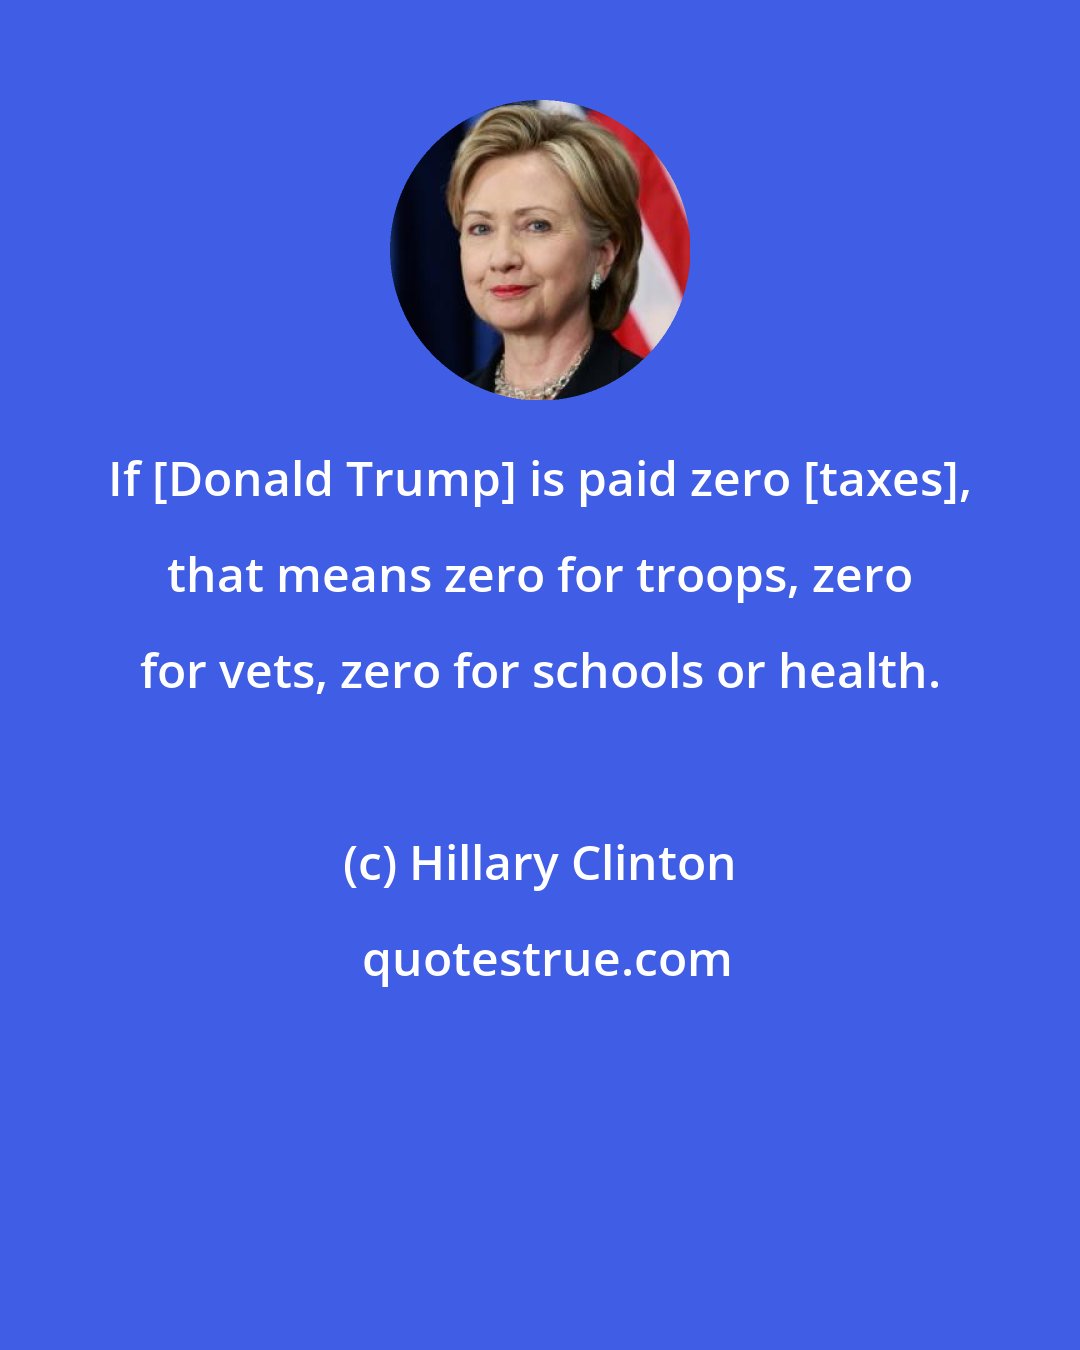 Hillary Clinton: If [Donald Trump] is paid zero [taxes], that means zero for troops, zero for vets, zero for schools or health.